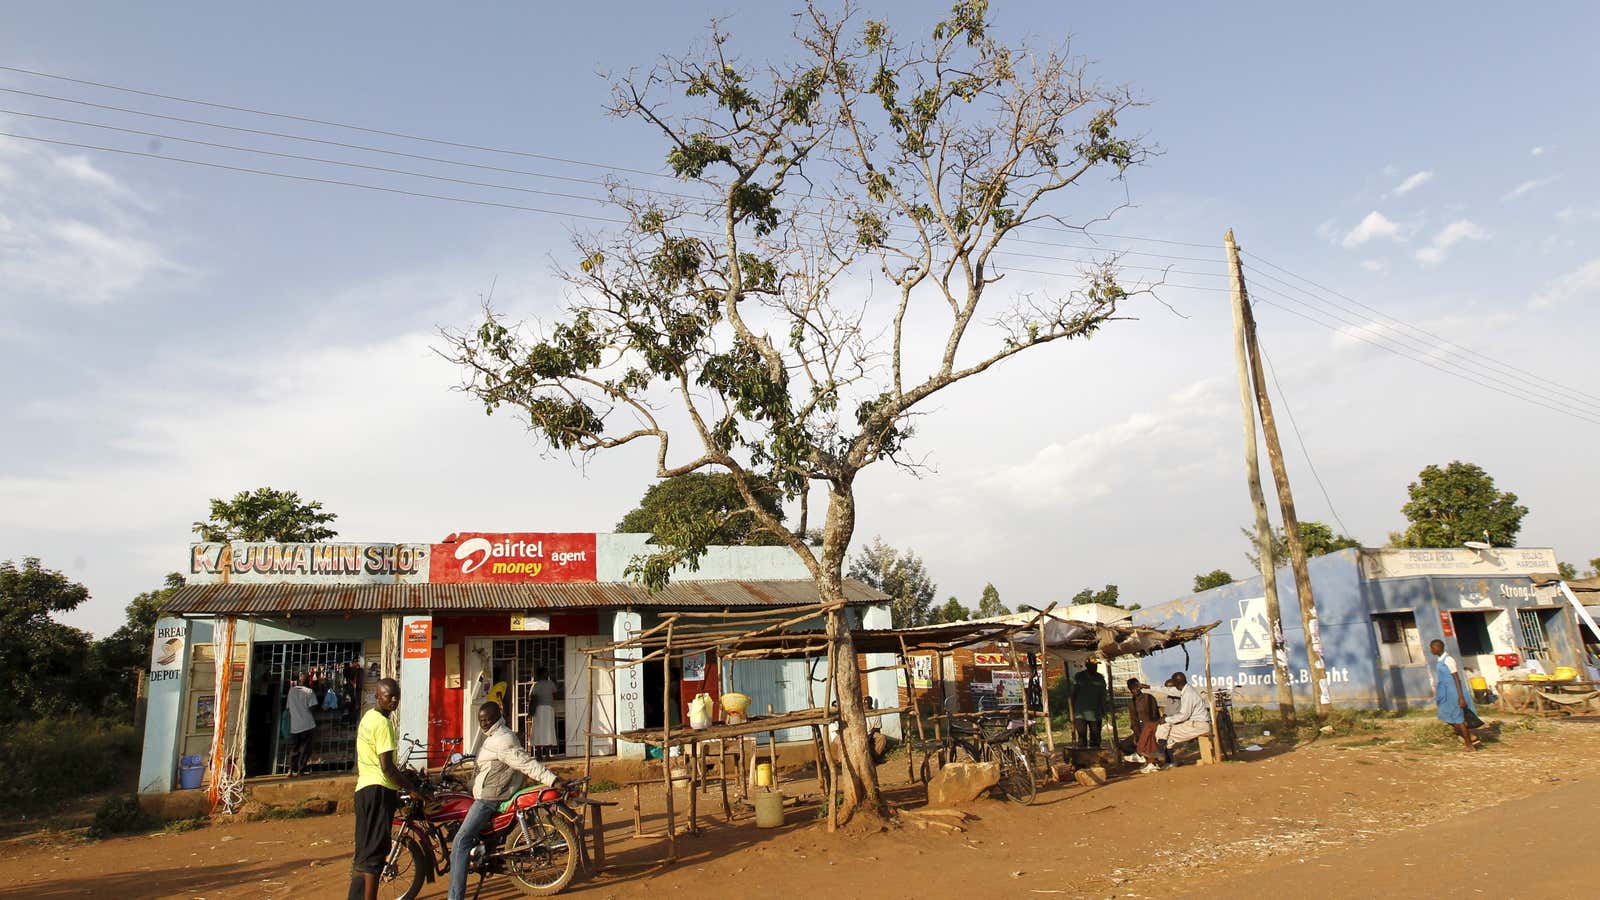 A trading center in the village of Kogelo, west of Kenya’s capital Nairobi